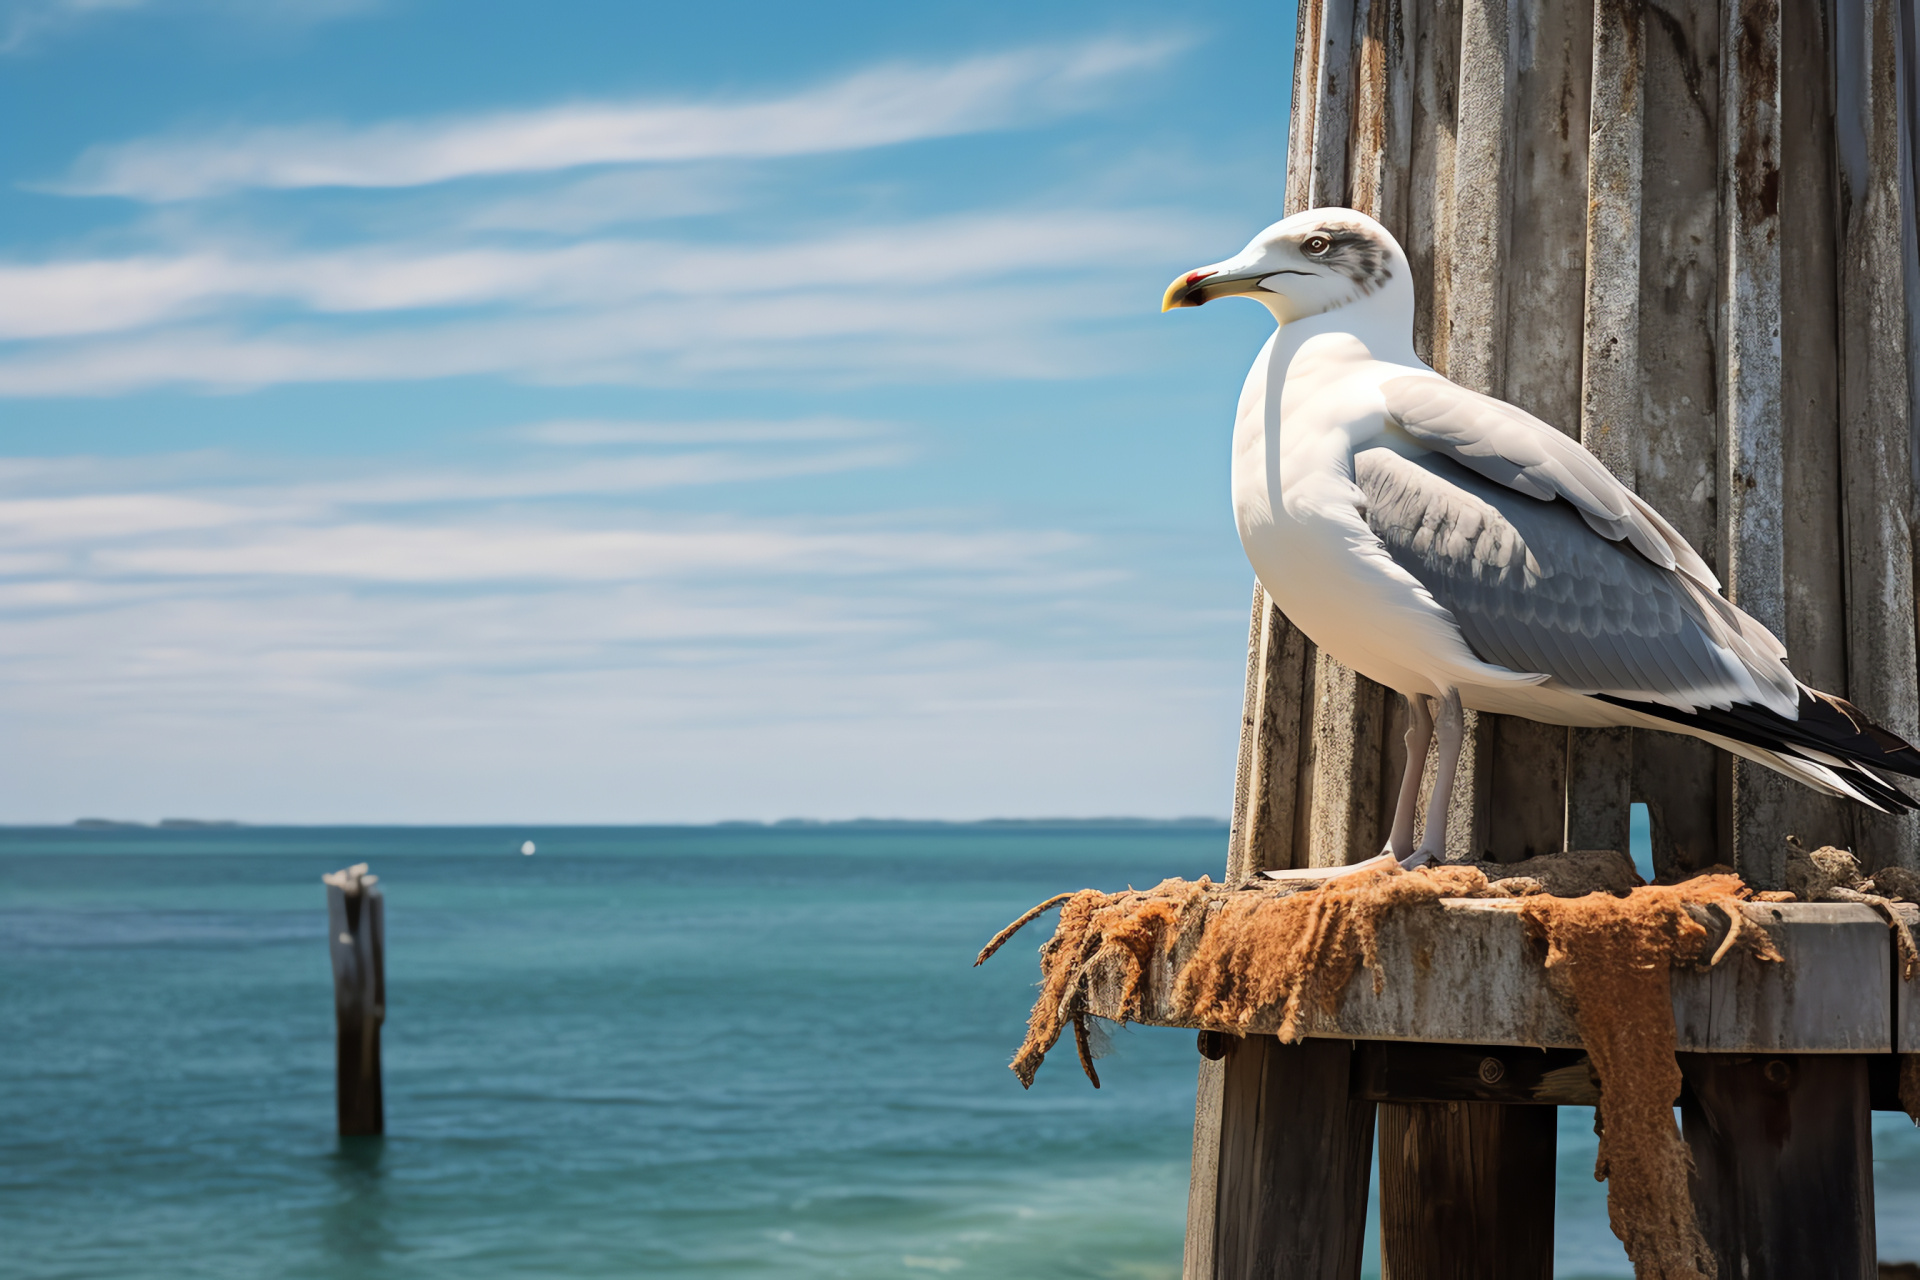 Seagull, Turquoise eyes, White feathers, Lighthouse, Tranquil scene, HD Desktop Wallpaper